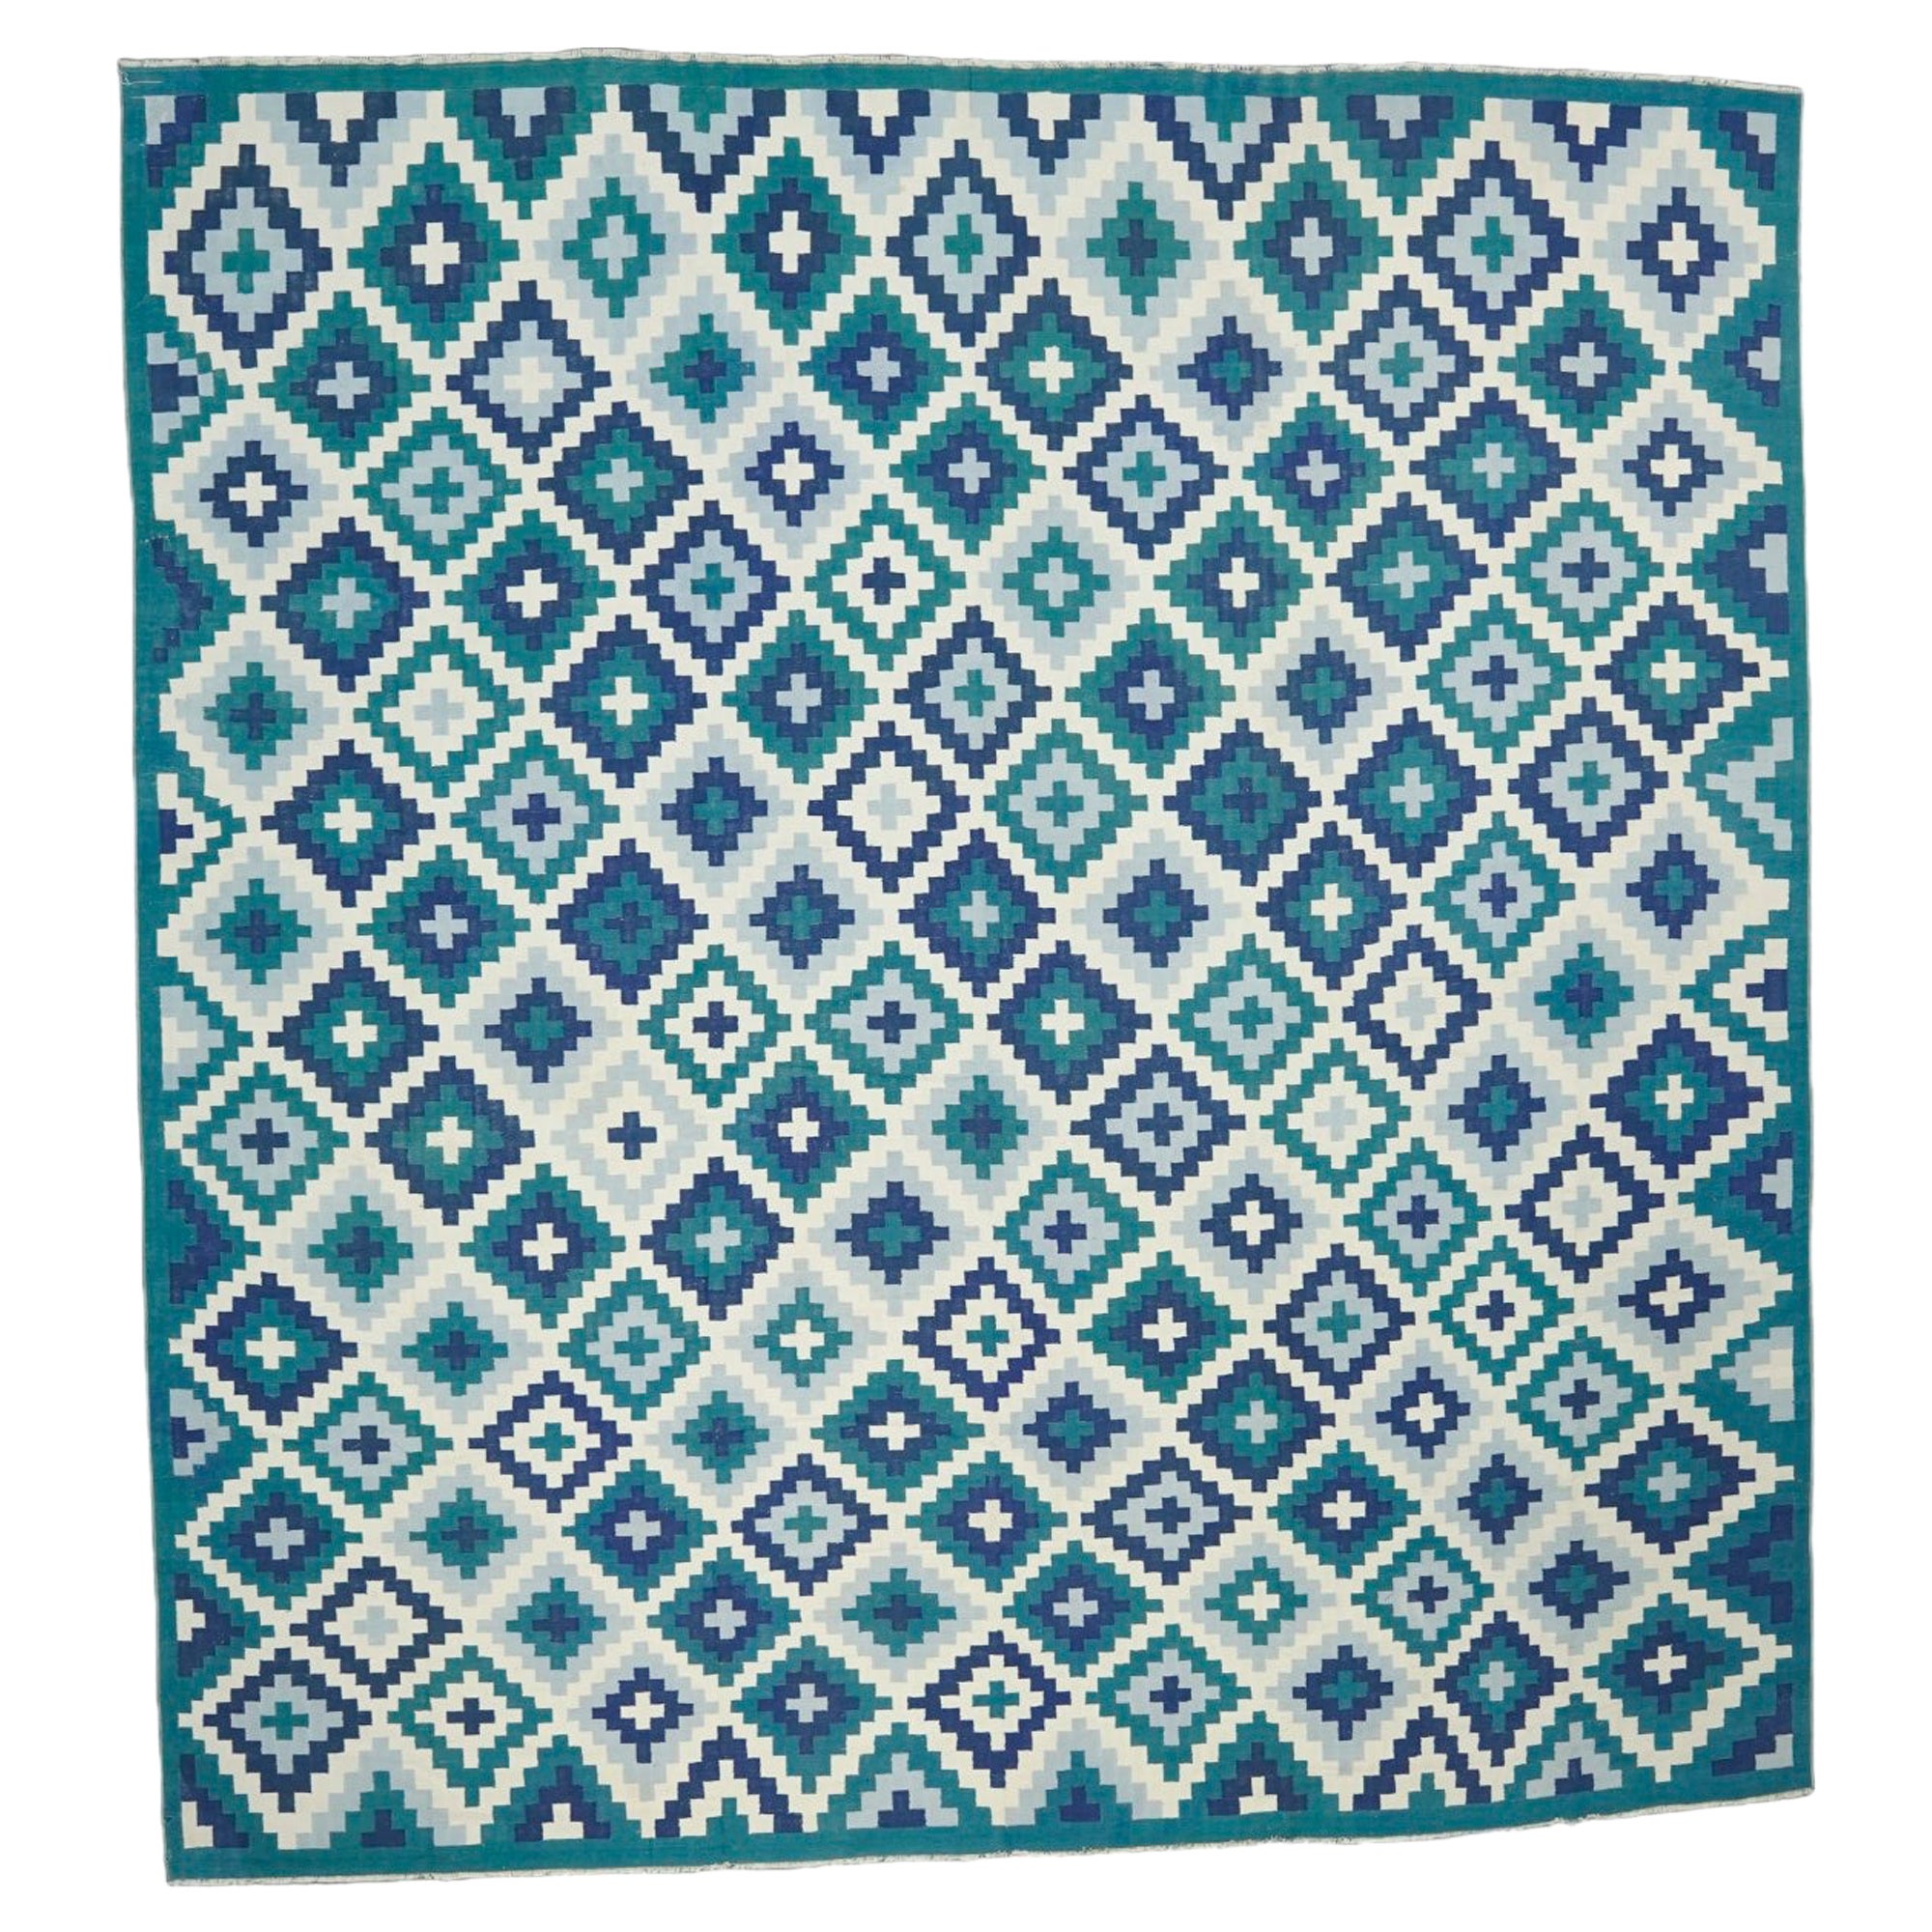 Vintage Dhurrie Rug in Teal, Blue and White Geometric Pattern, from Rug & Kilim  For Sale